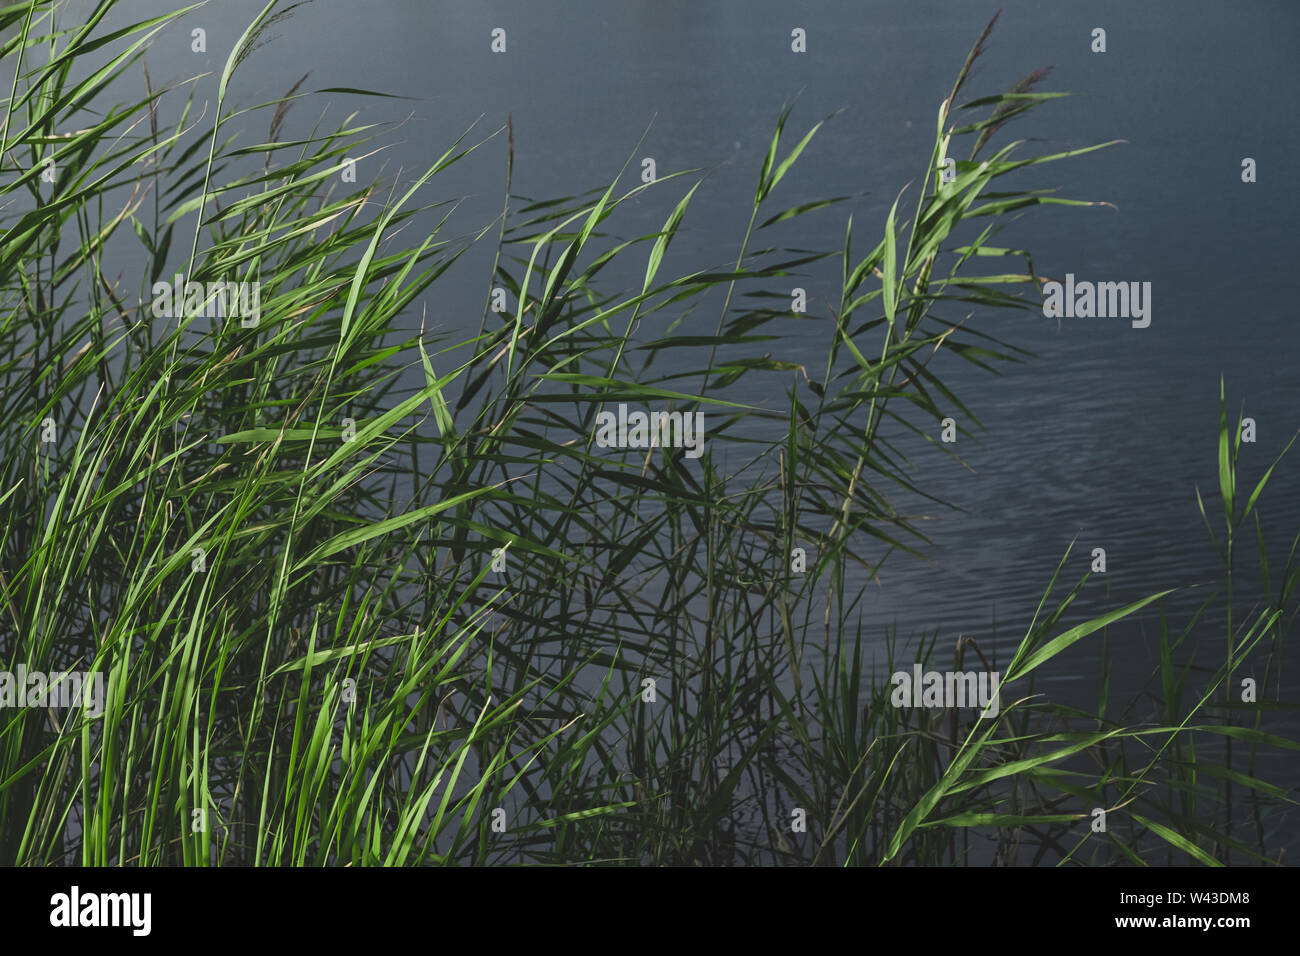 Balrush plants and a pond in faded green and leady blue colors. Calming nature details: sunlit lake cane and dark water. Stock Photo